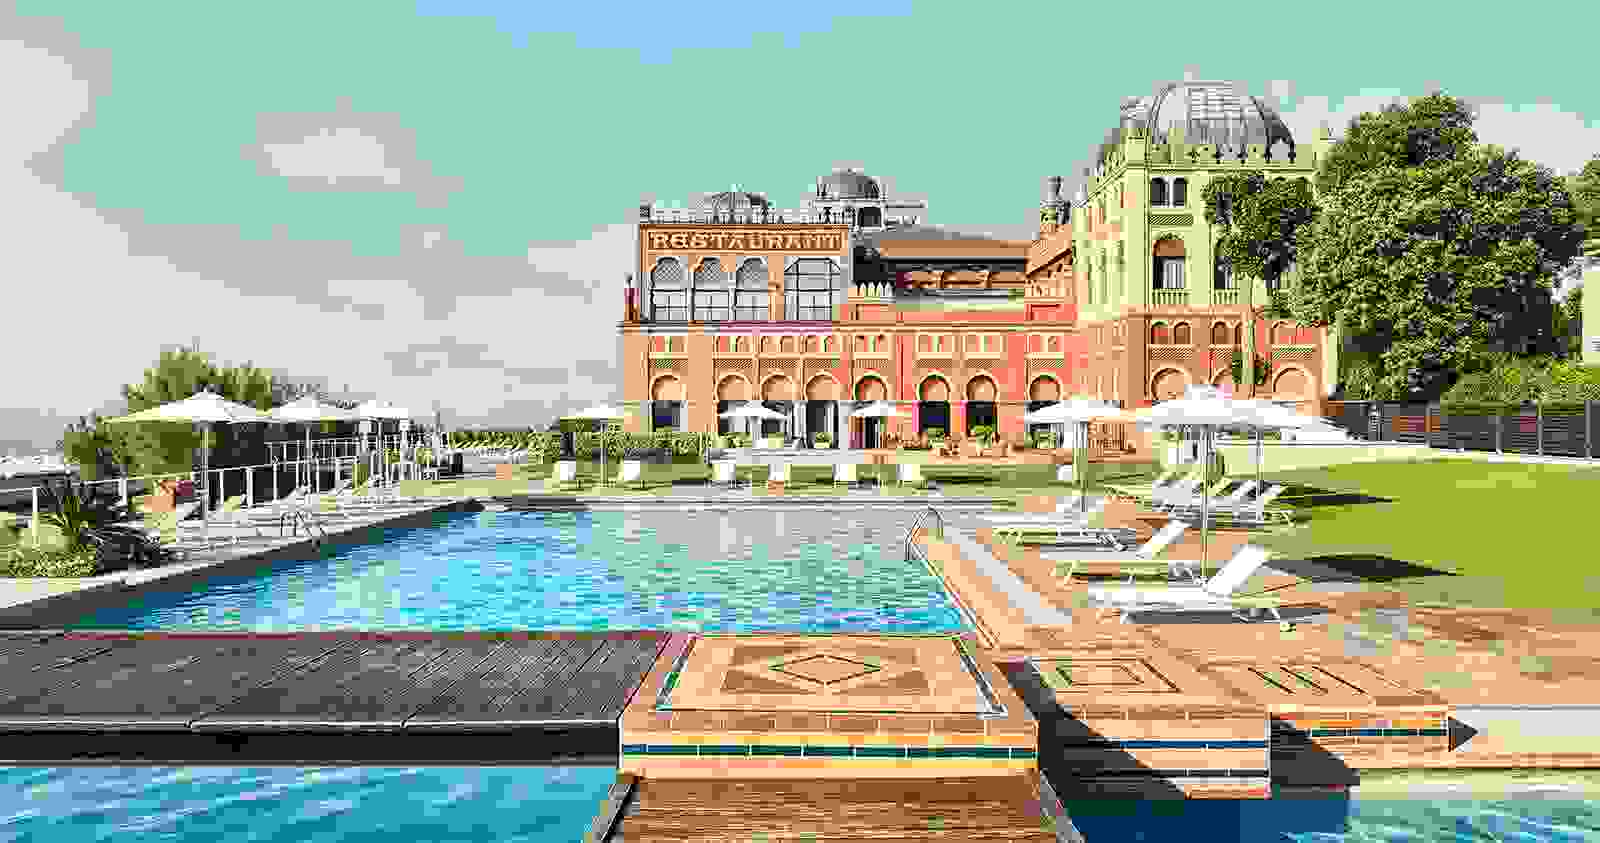 The outdoor pool of Hotel Excelsior Venice Lido, luxury hotel in Venice, Italy